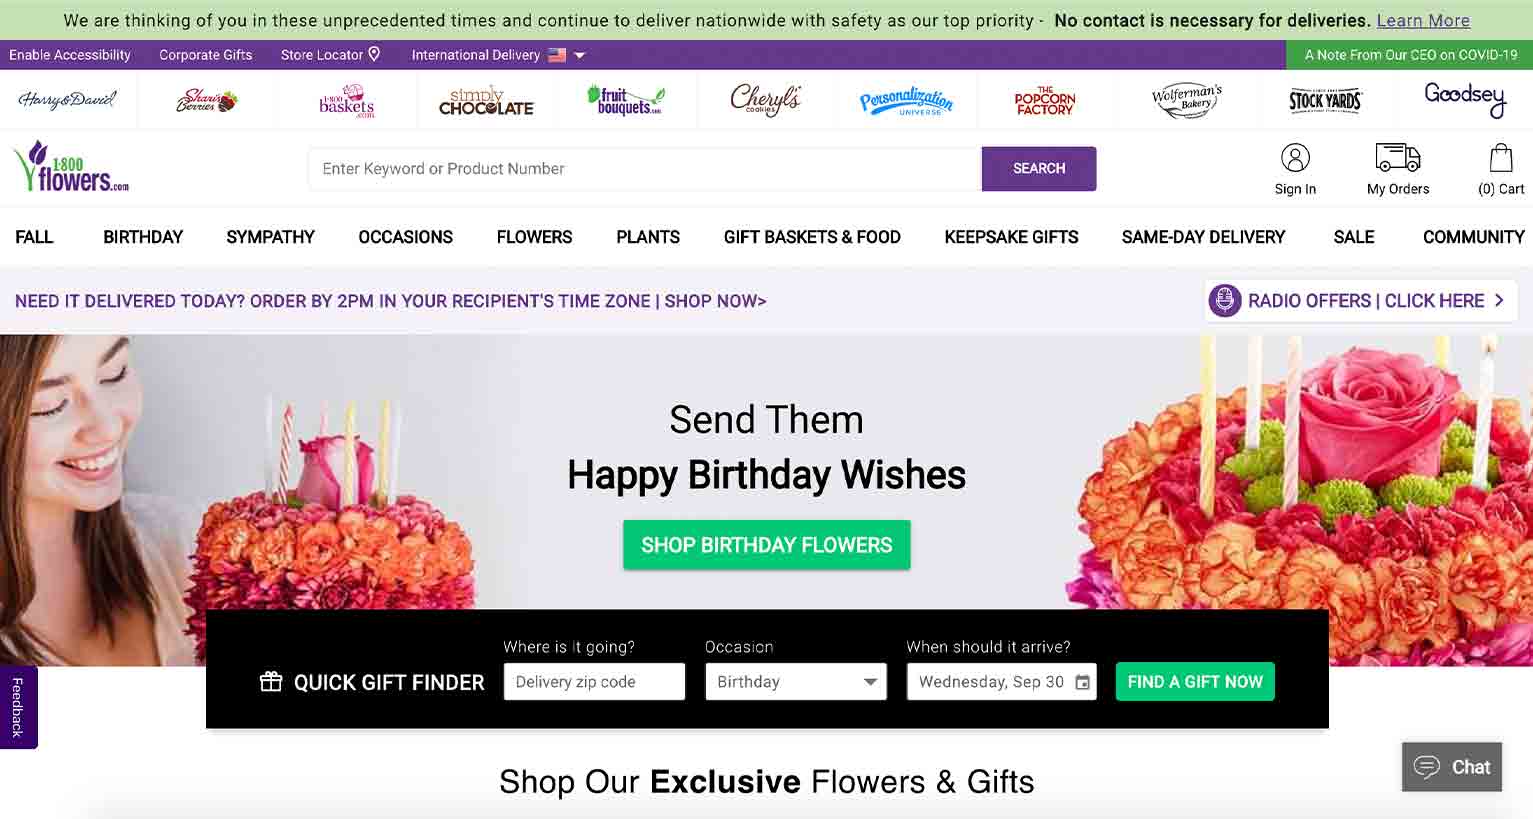 1-800-Flowers.com is one example of a company that’s diversified its product line with a family of brands ranging from The Popcorn Factory to Harry & David.